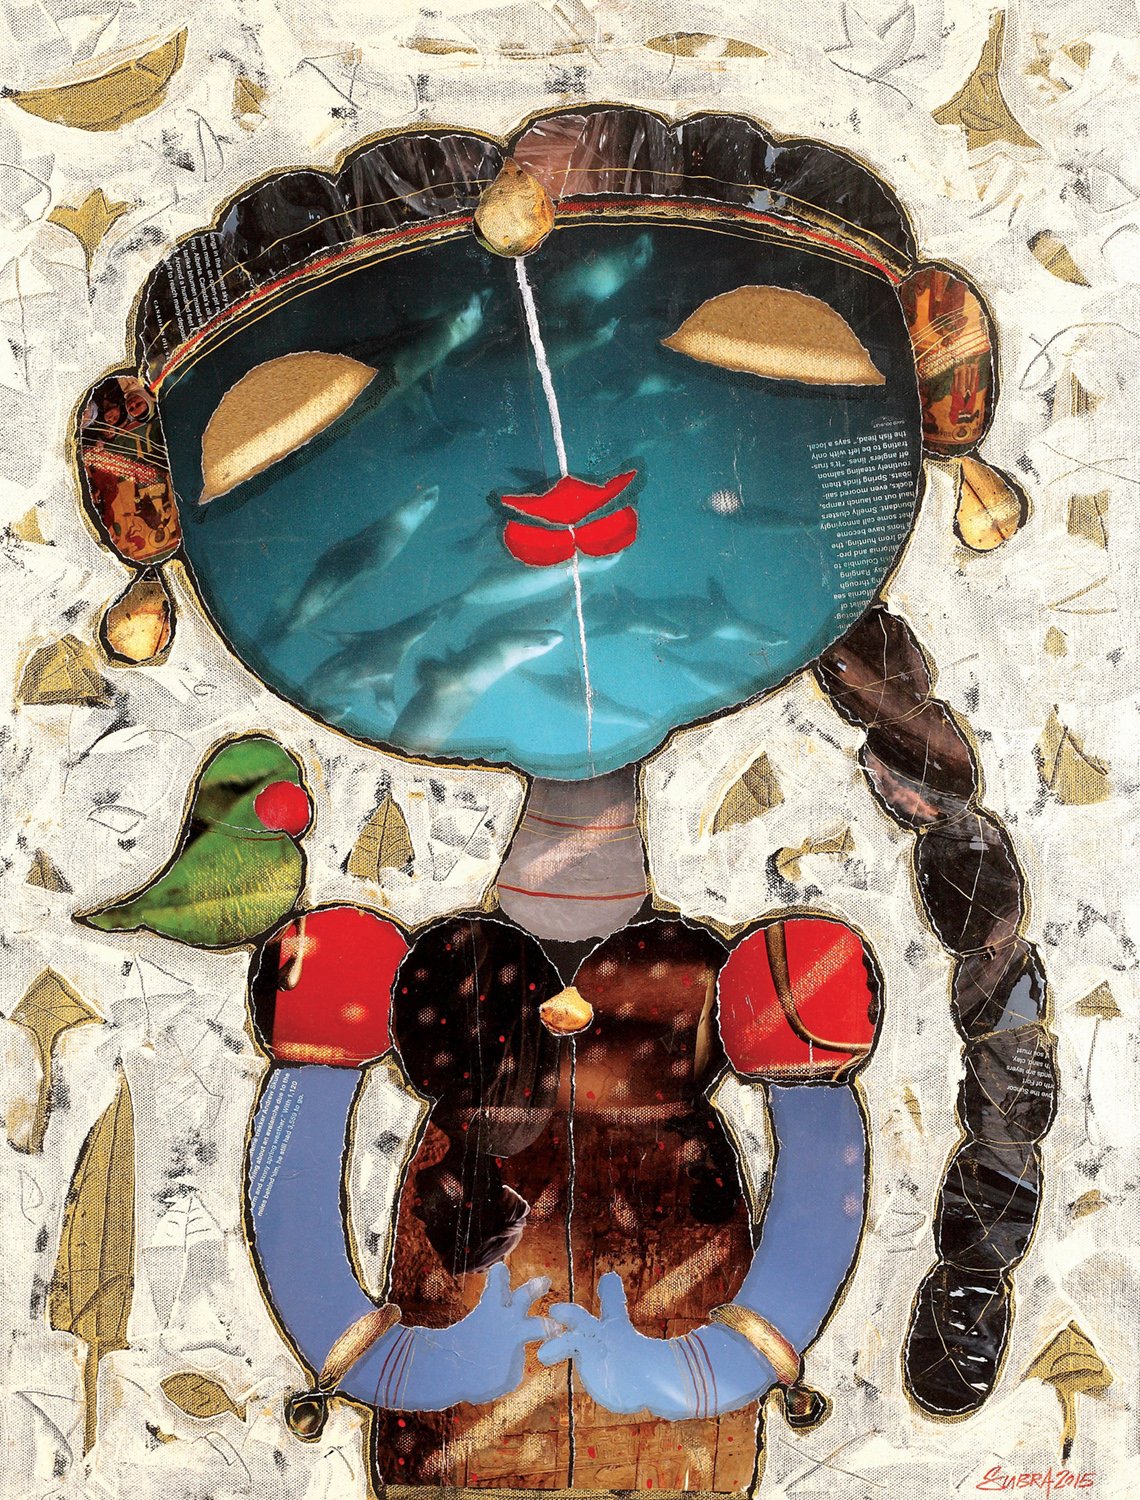 Girl with parrot I|G. Subramanian- Mixed Media on Canvas, 2015, 26 x 20 inches